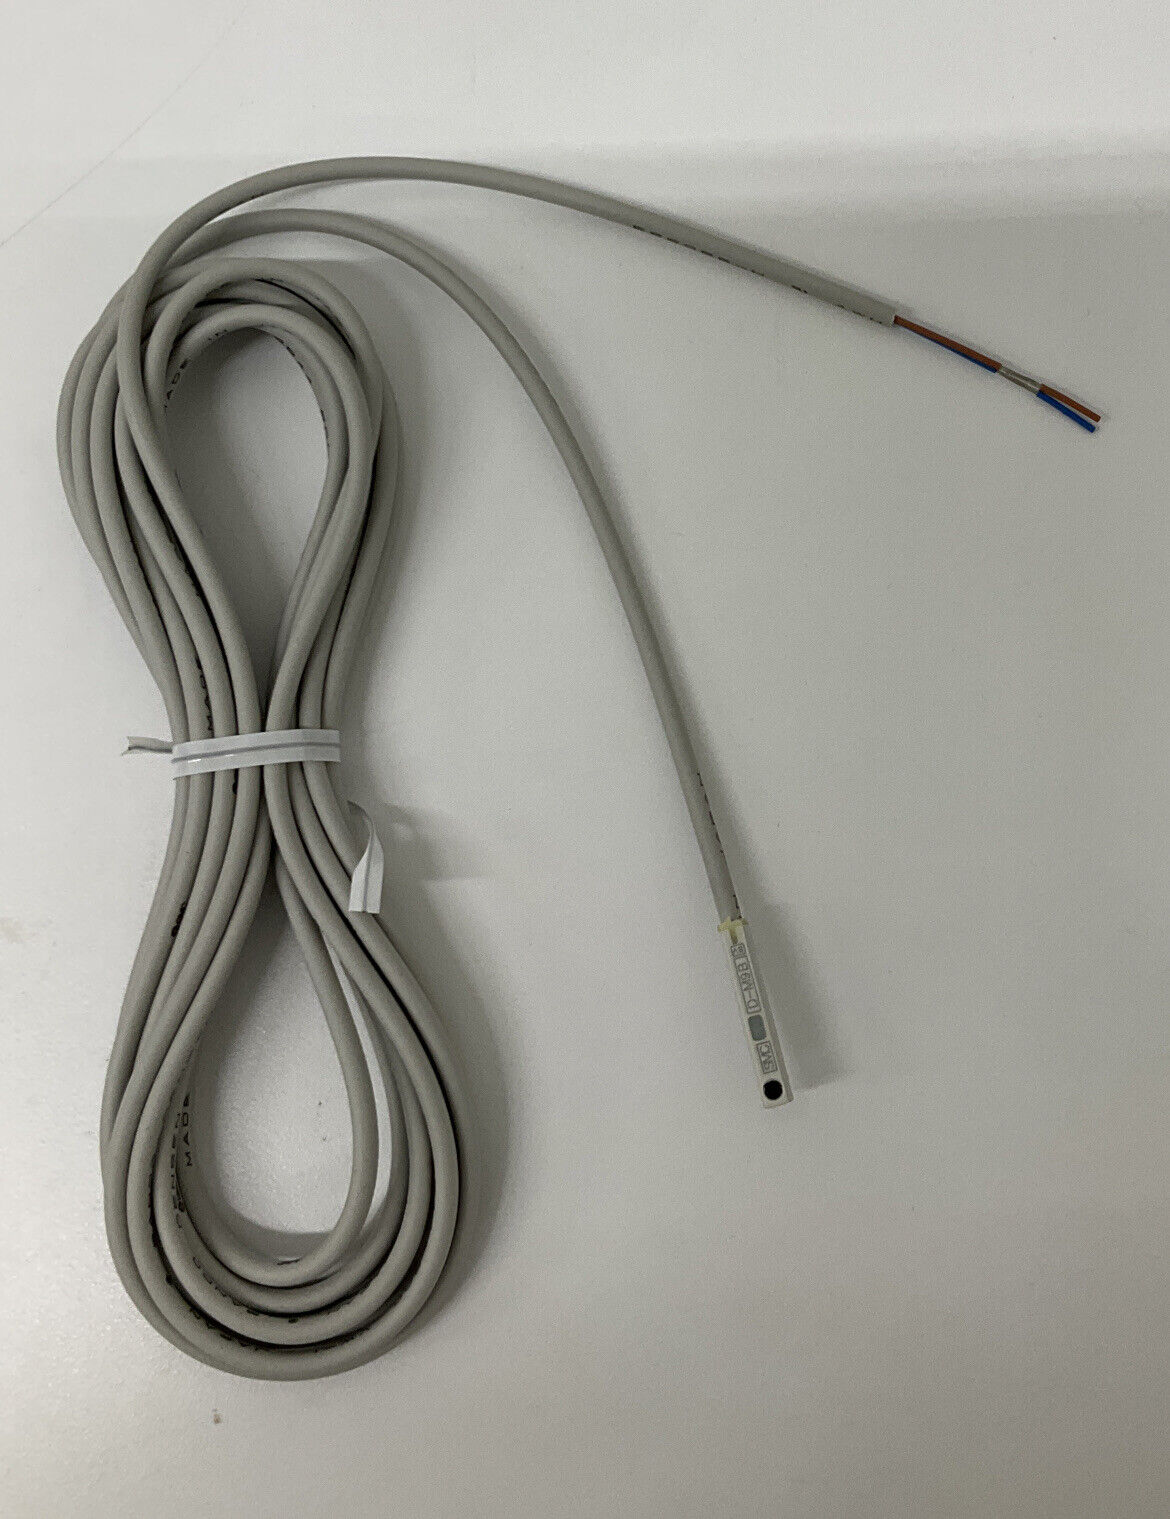 SMC  D-M9BL  Reed Switch Sensor  2-wire  3 Meters (RE190)